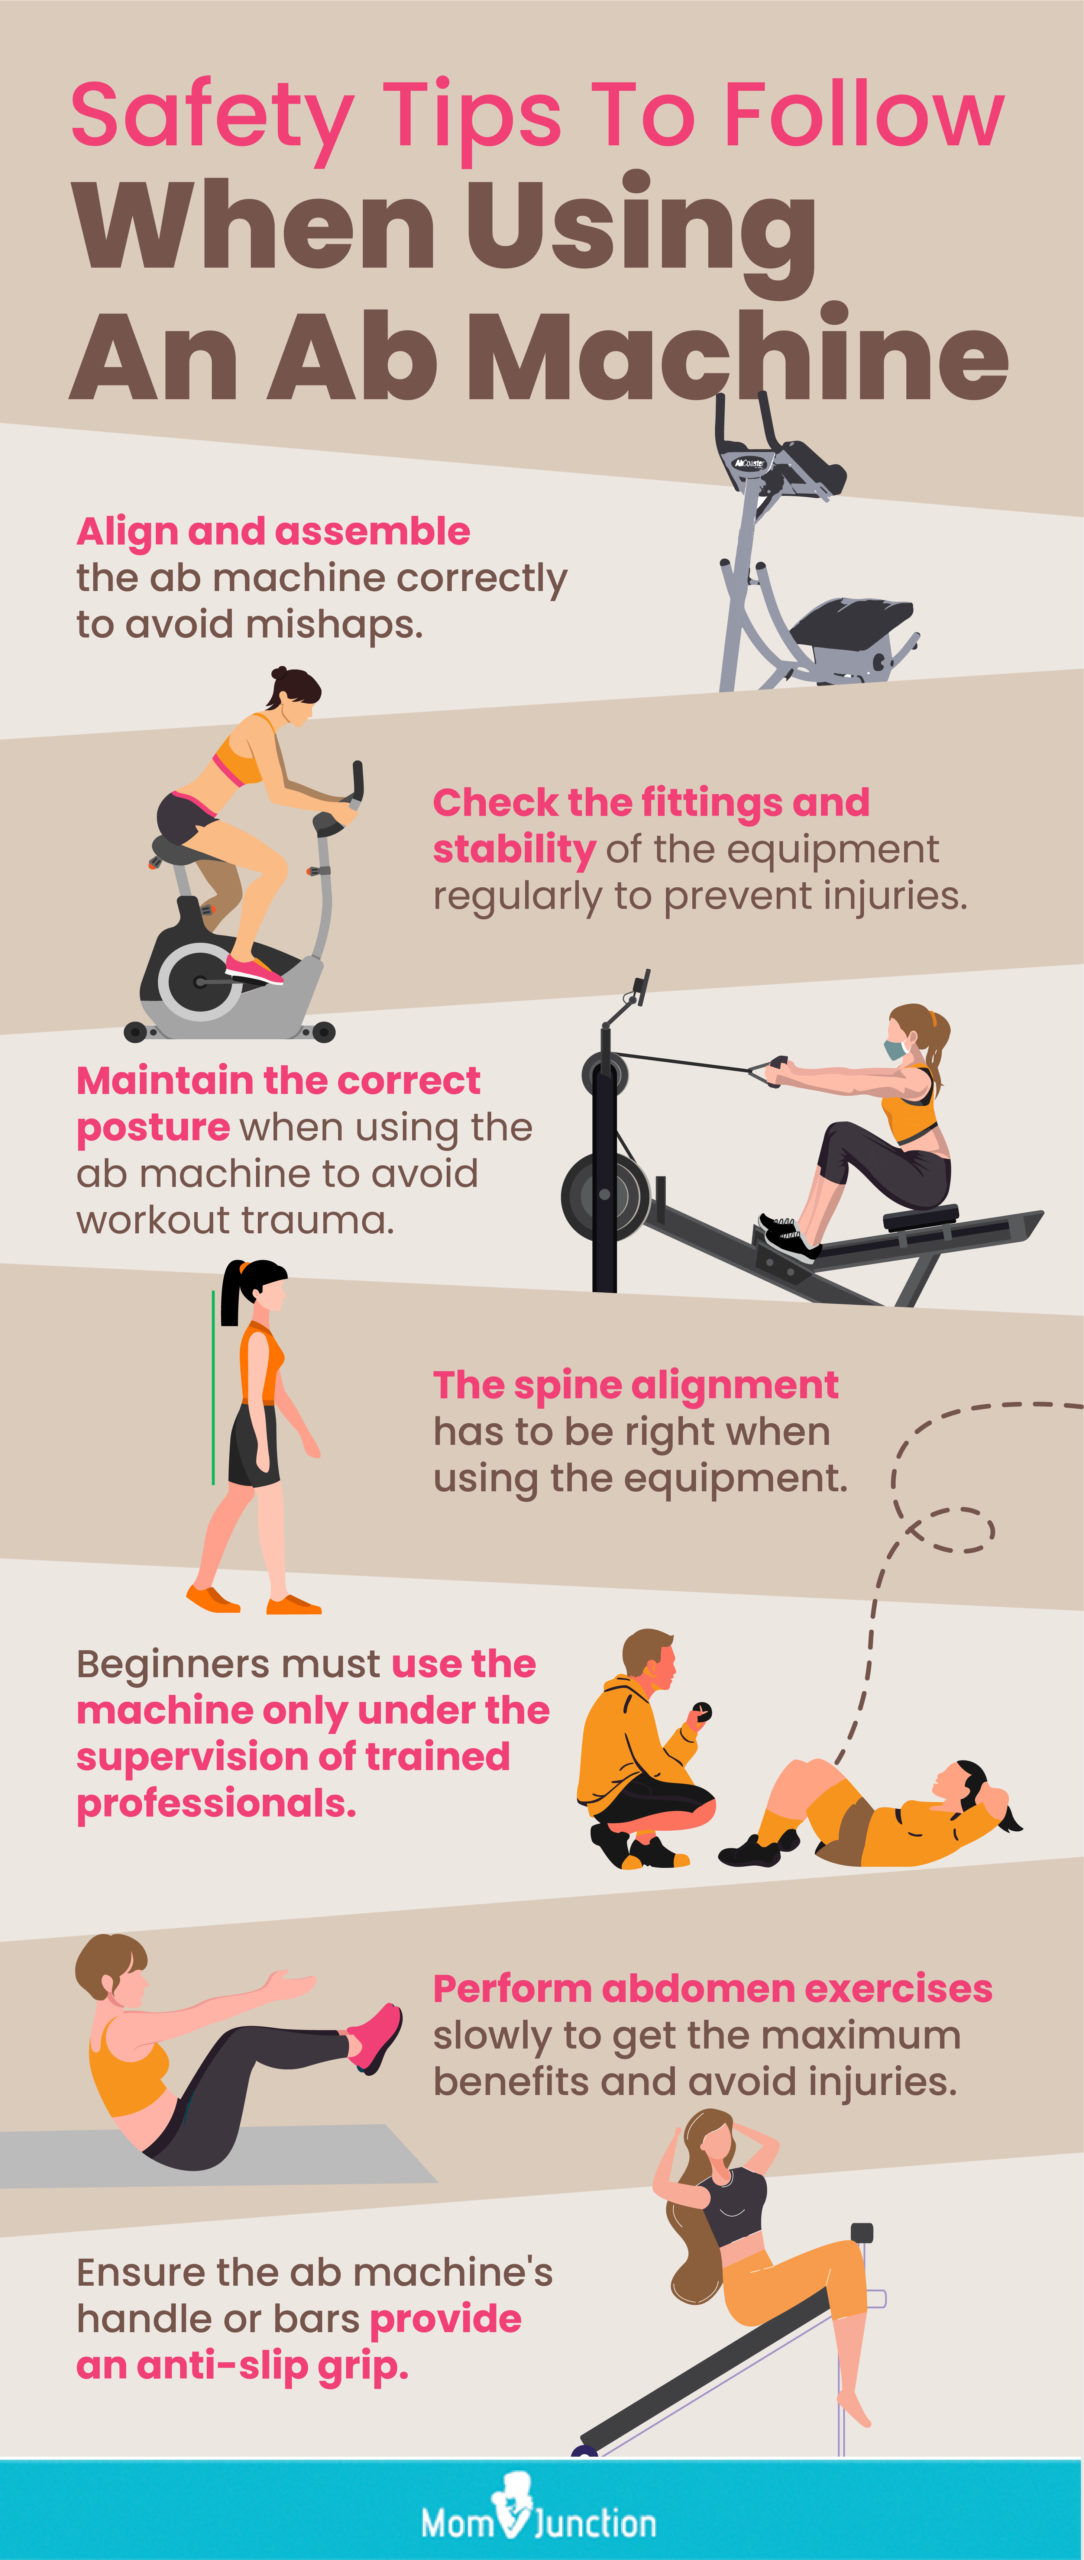 Safety Tips To Follow When Using An Ab Machine (infographic)